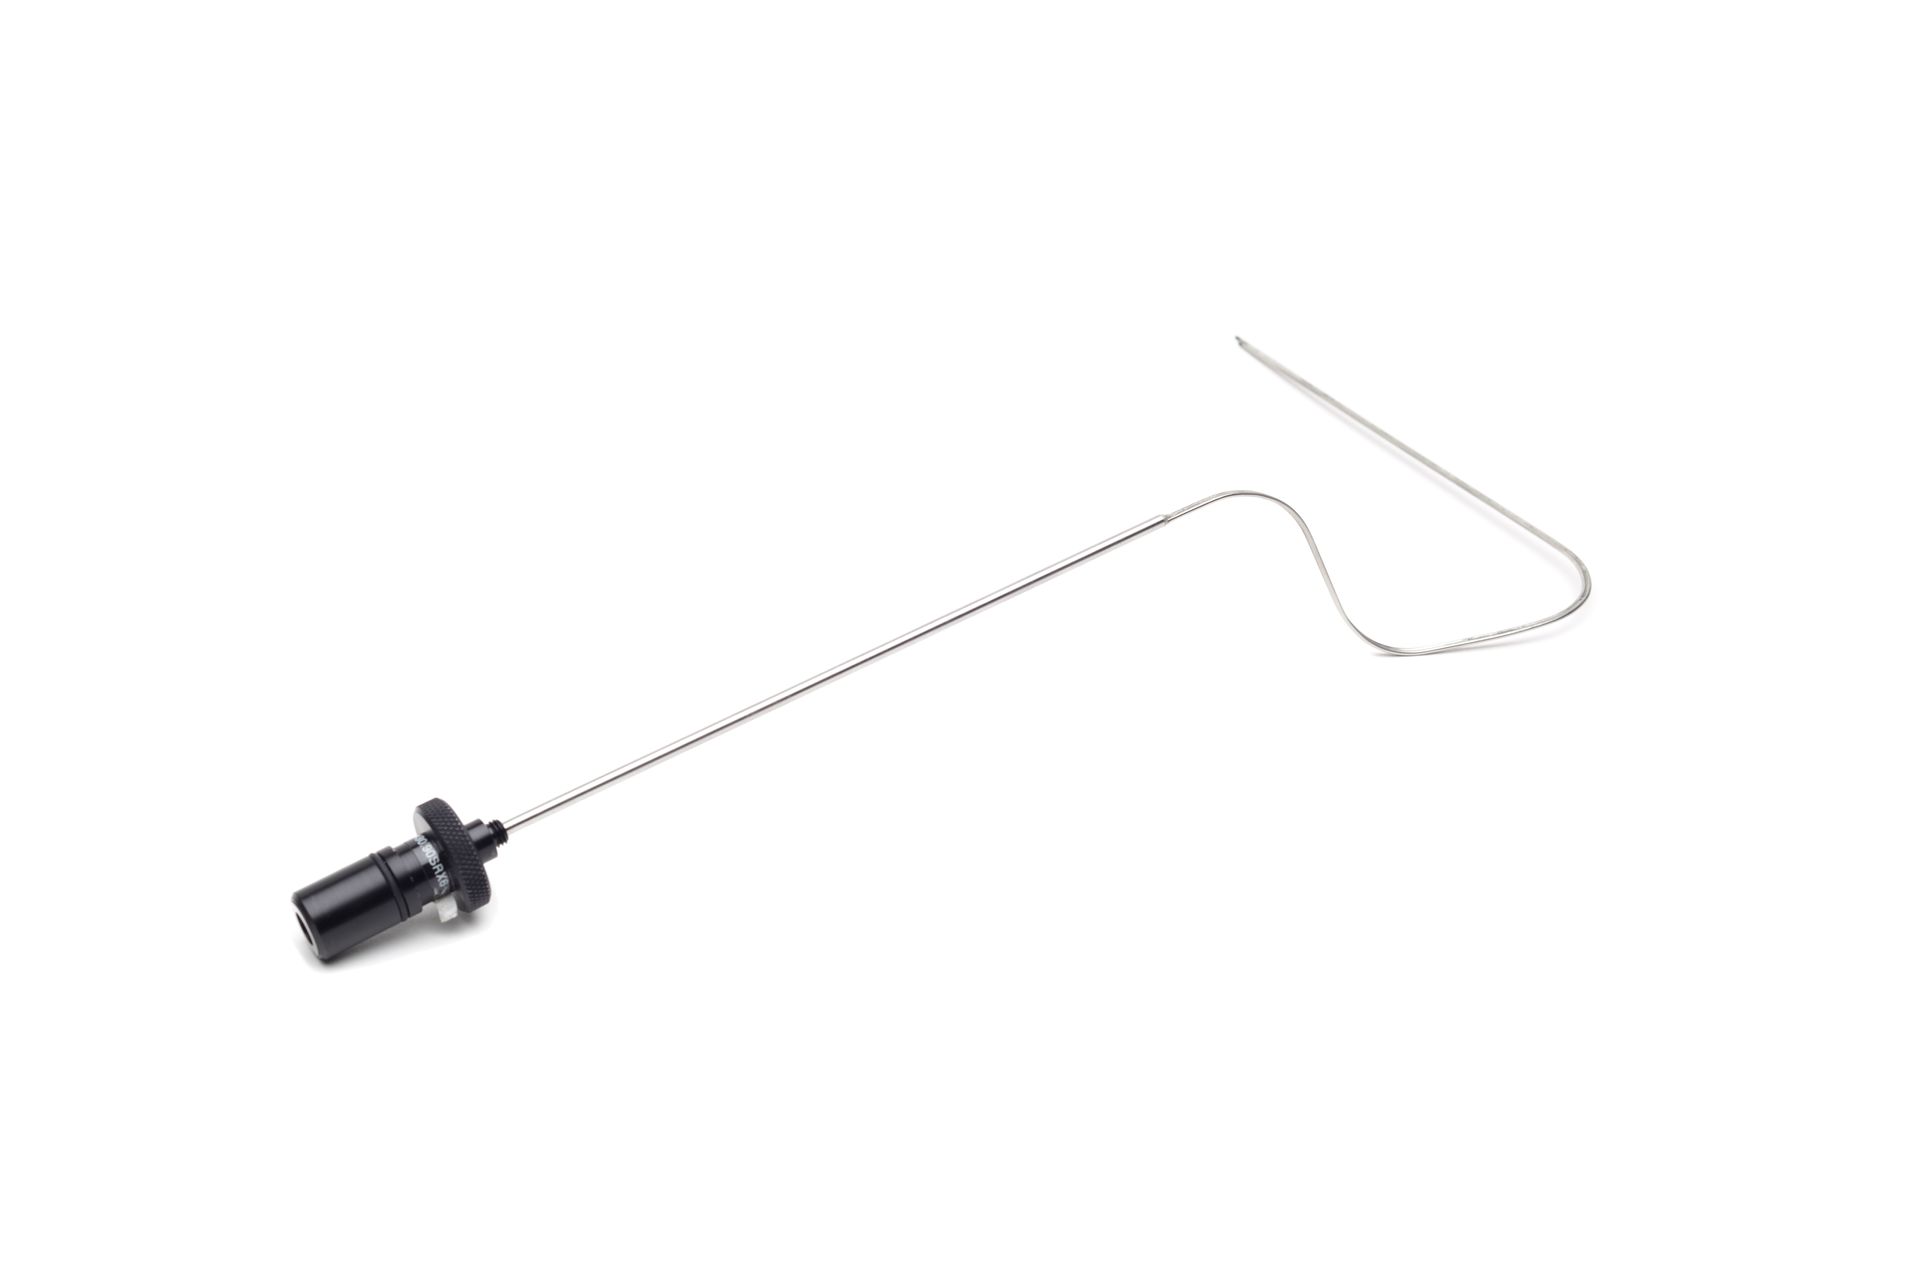 A close up of a needle with a long wire attached to it on a white background.